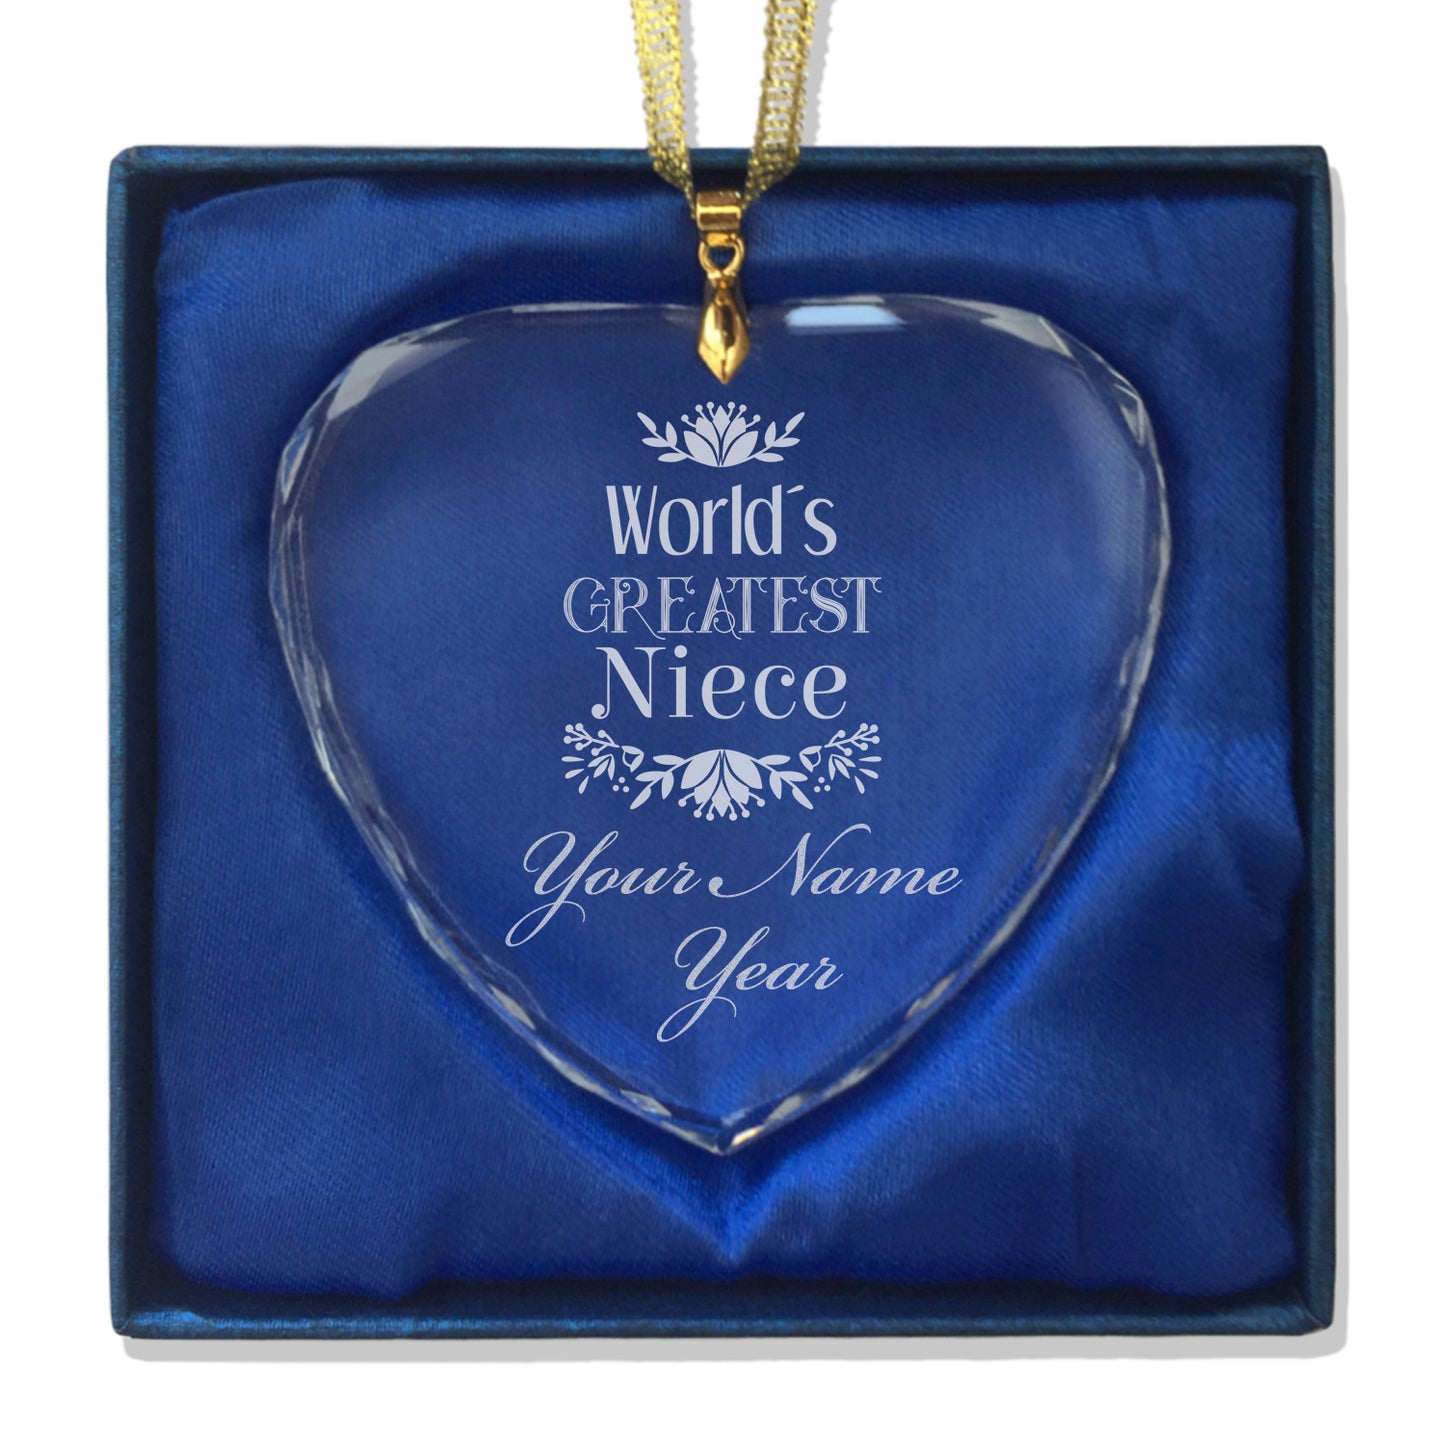 LaserGram Christmas Ornament, World's Greatest Niece, Personalized Engraving Included (Heart Shape)